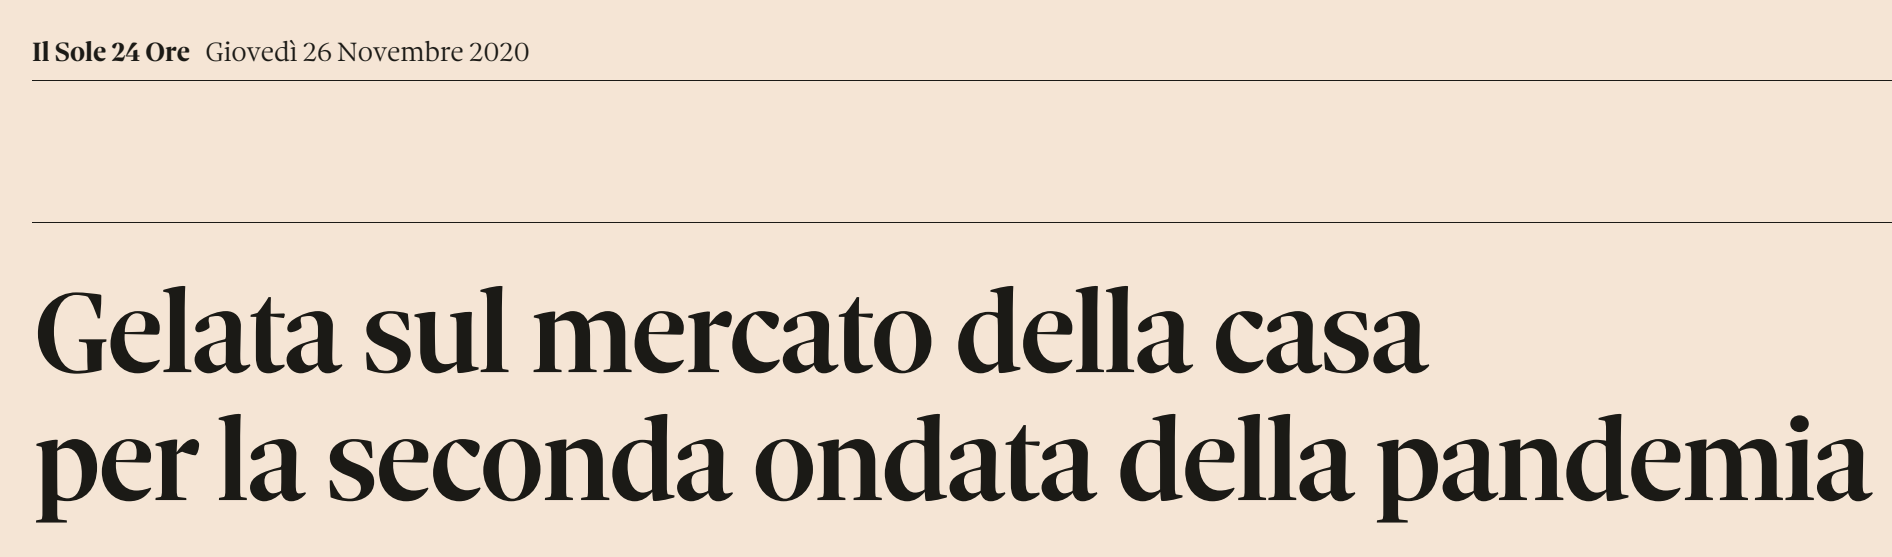 sole 24